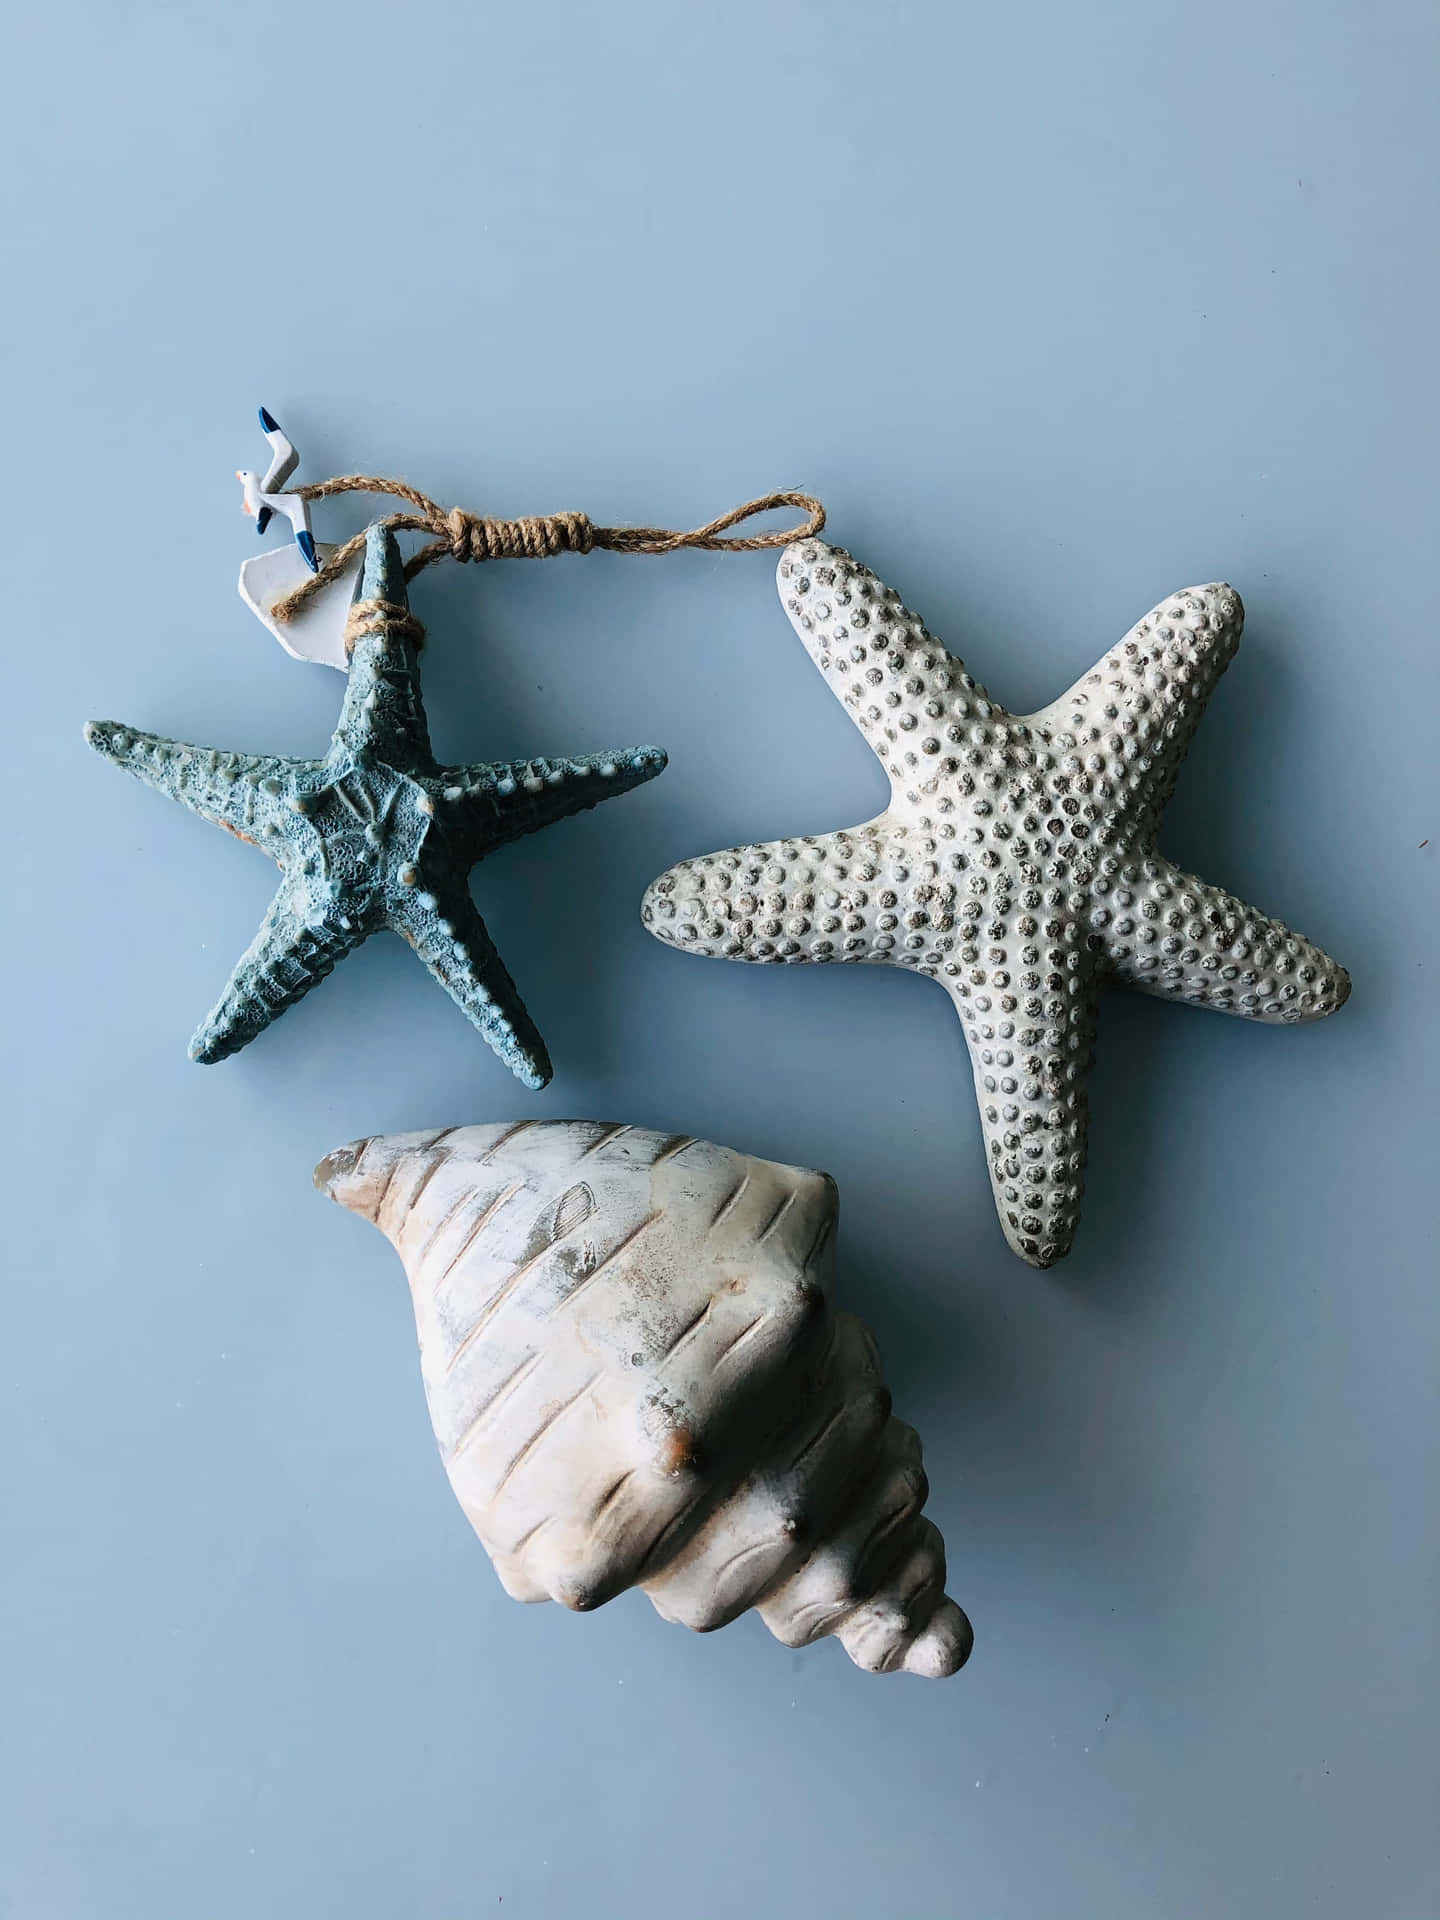 A starfish, shell and seashell are displayed on the table - Starfish